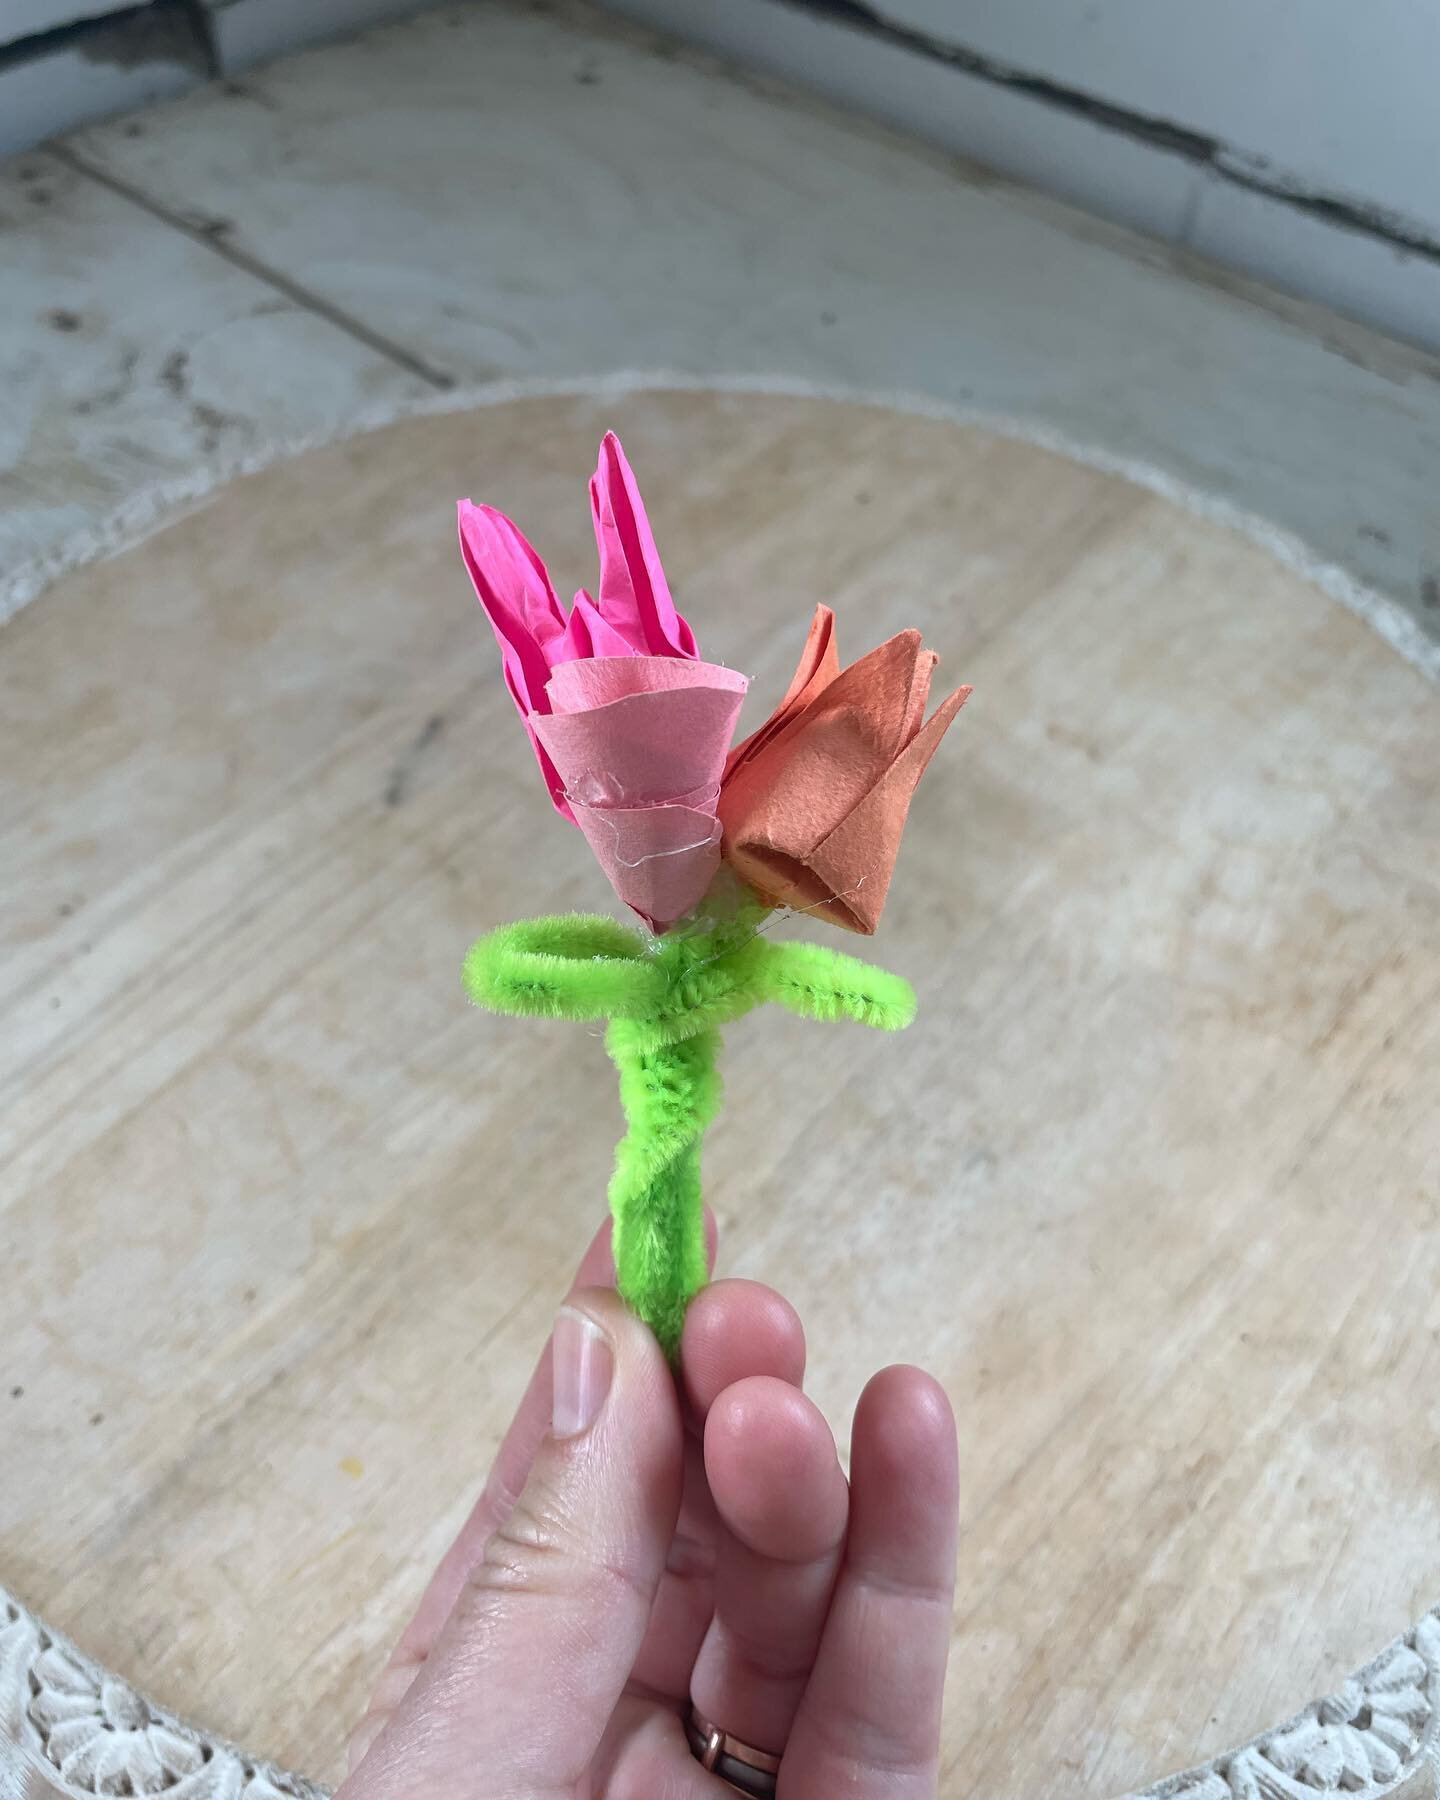 When your mom is busy putting together flowers for everyone else&rsquo;s mom you make an origami bouquet&hellip;. #mysweetboy #mothersday #origami #origamiflowers